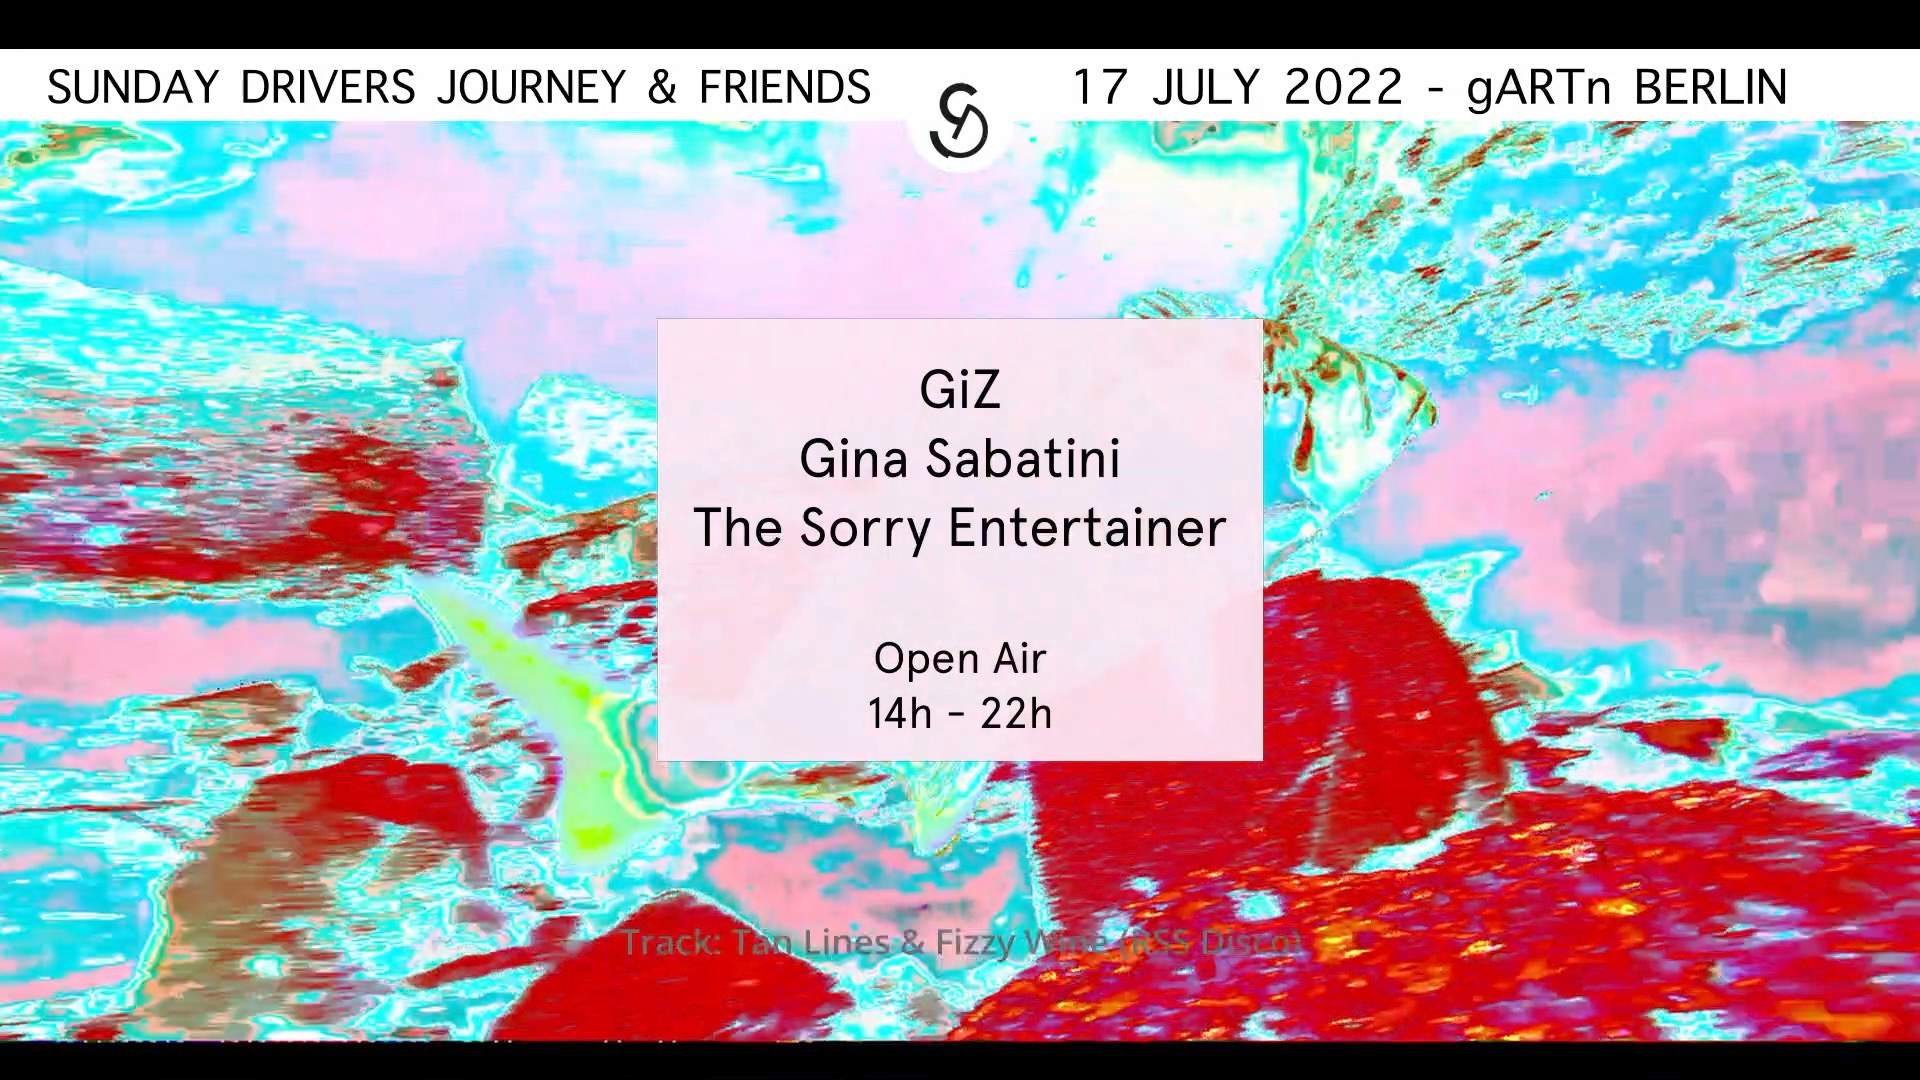 Sunday Drivers Journey with The Sorry Entertainer, GiZ and Gina Sabatini - フライヤー表